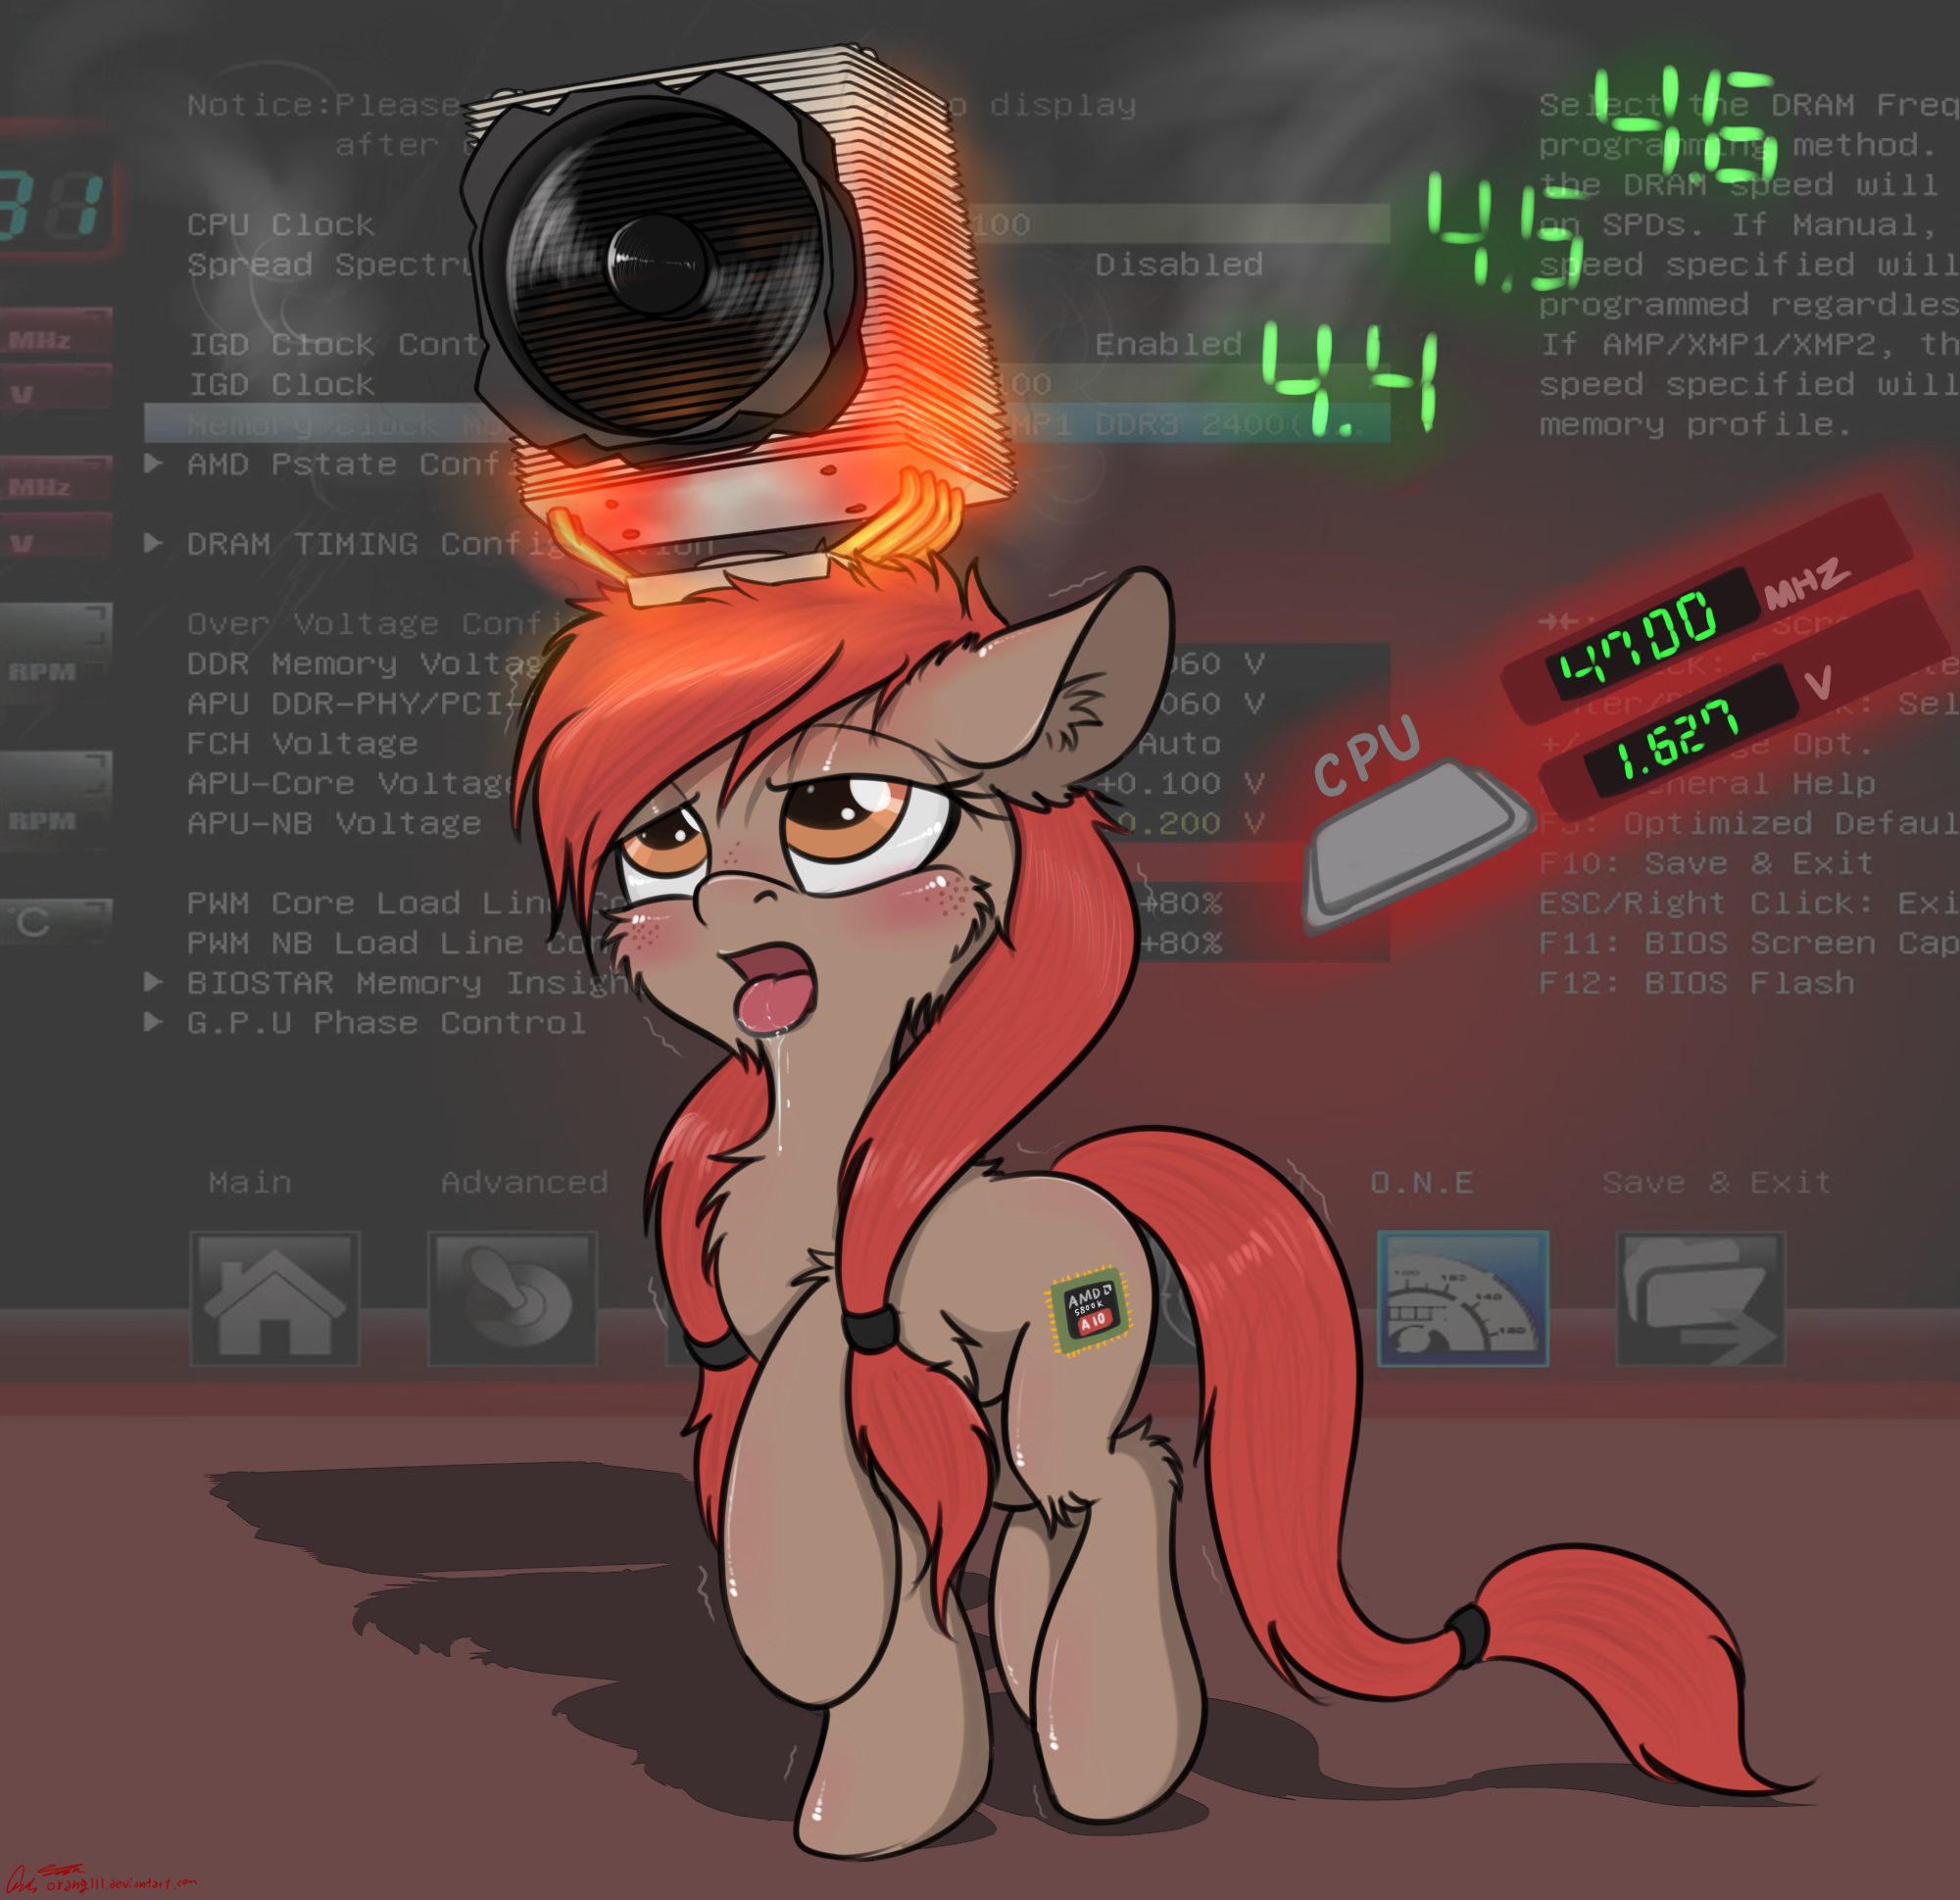 Overclocking the pone. by orang111